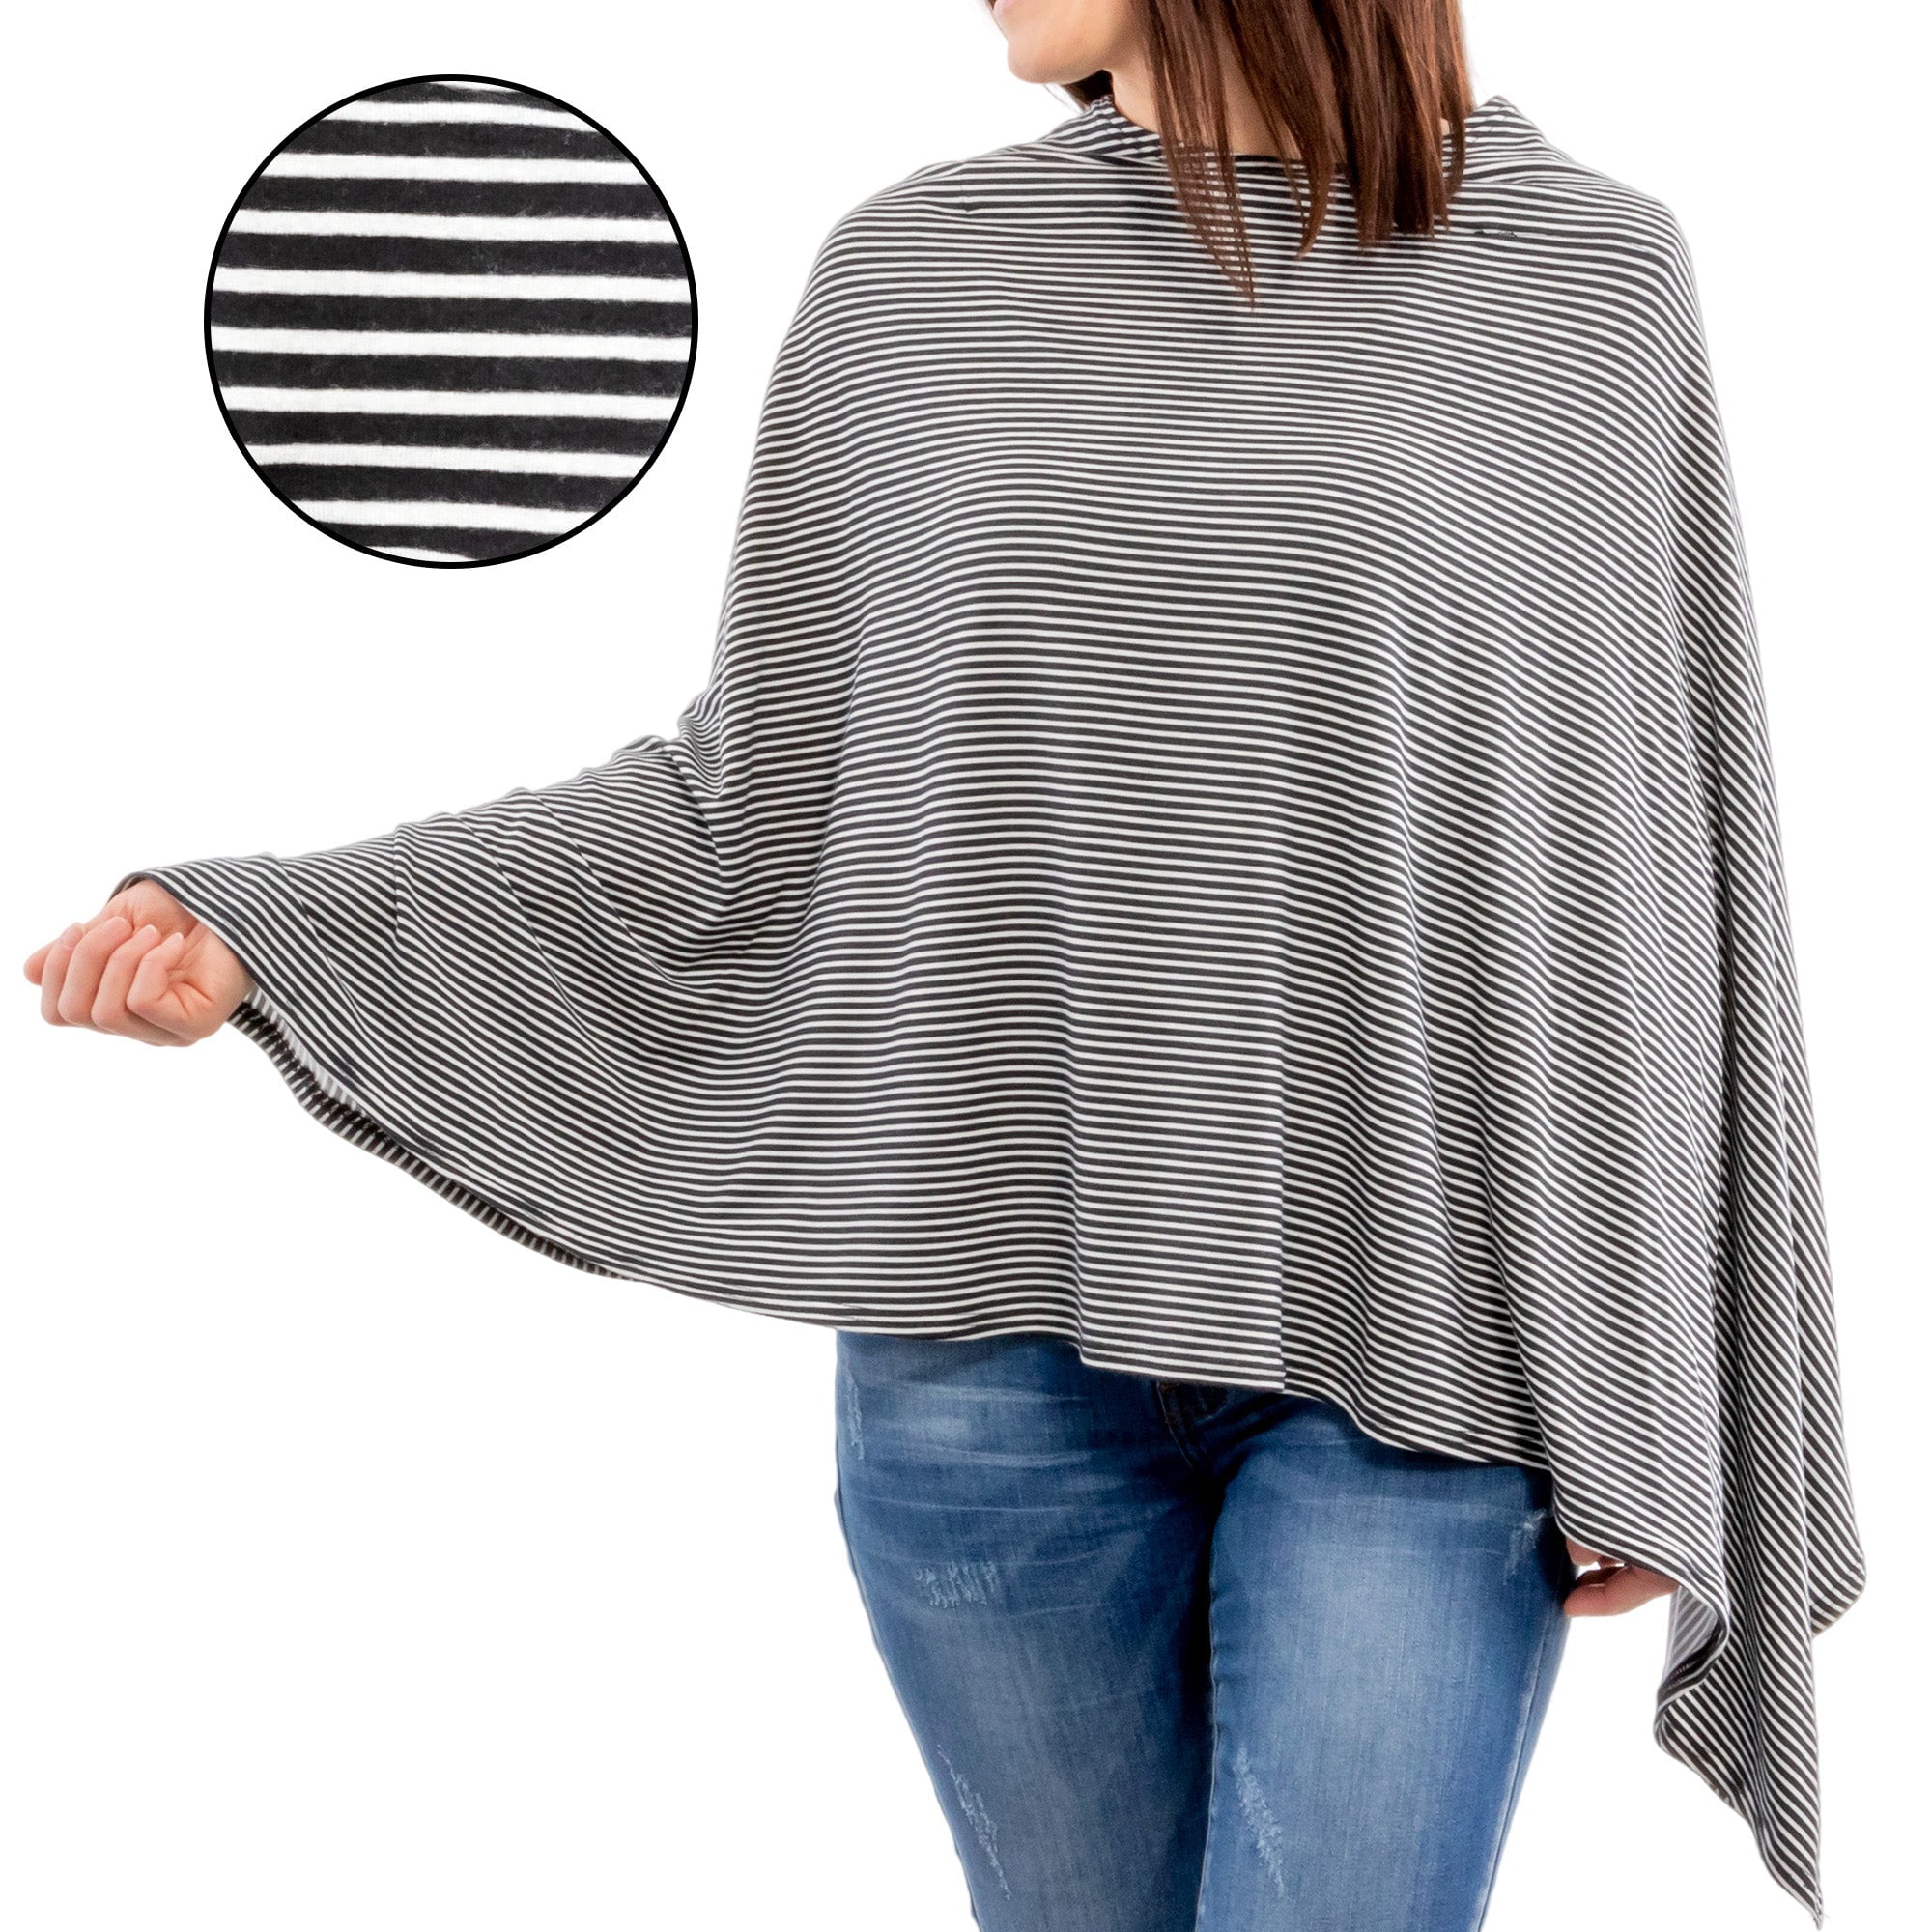 1 Poncho – Breast Pumping Cover